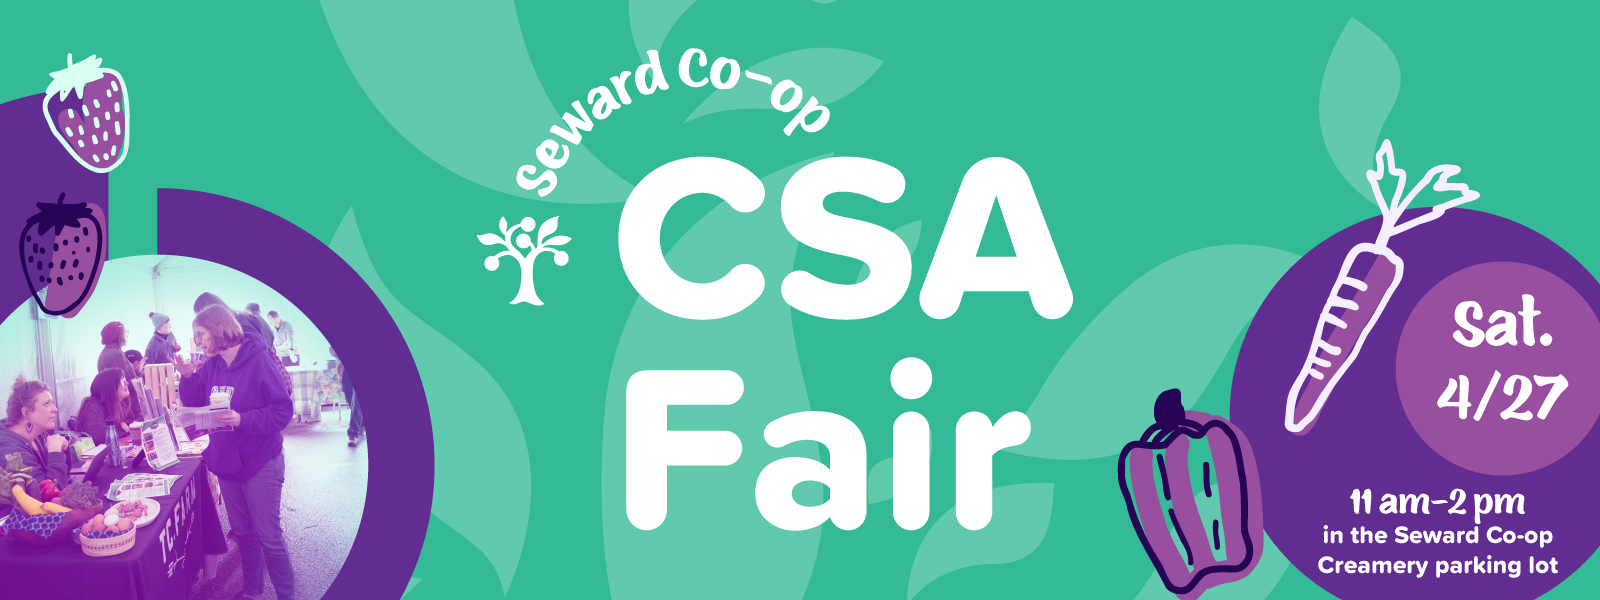 A graphic for the 2024 CSA fair which is in the Co-op Creamery Building parking lot on Saturday April 27 from 11 a.m. to 2 p.m.